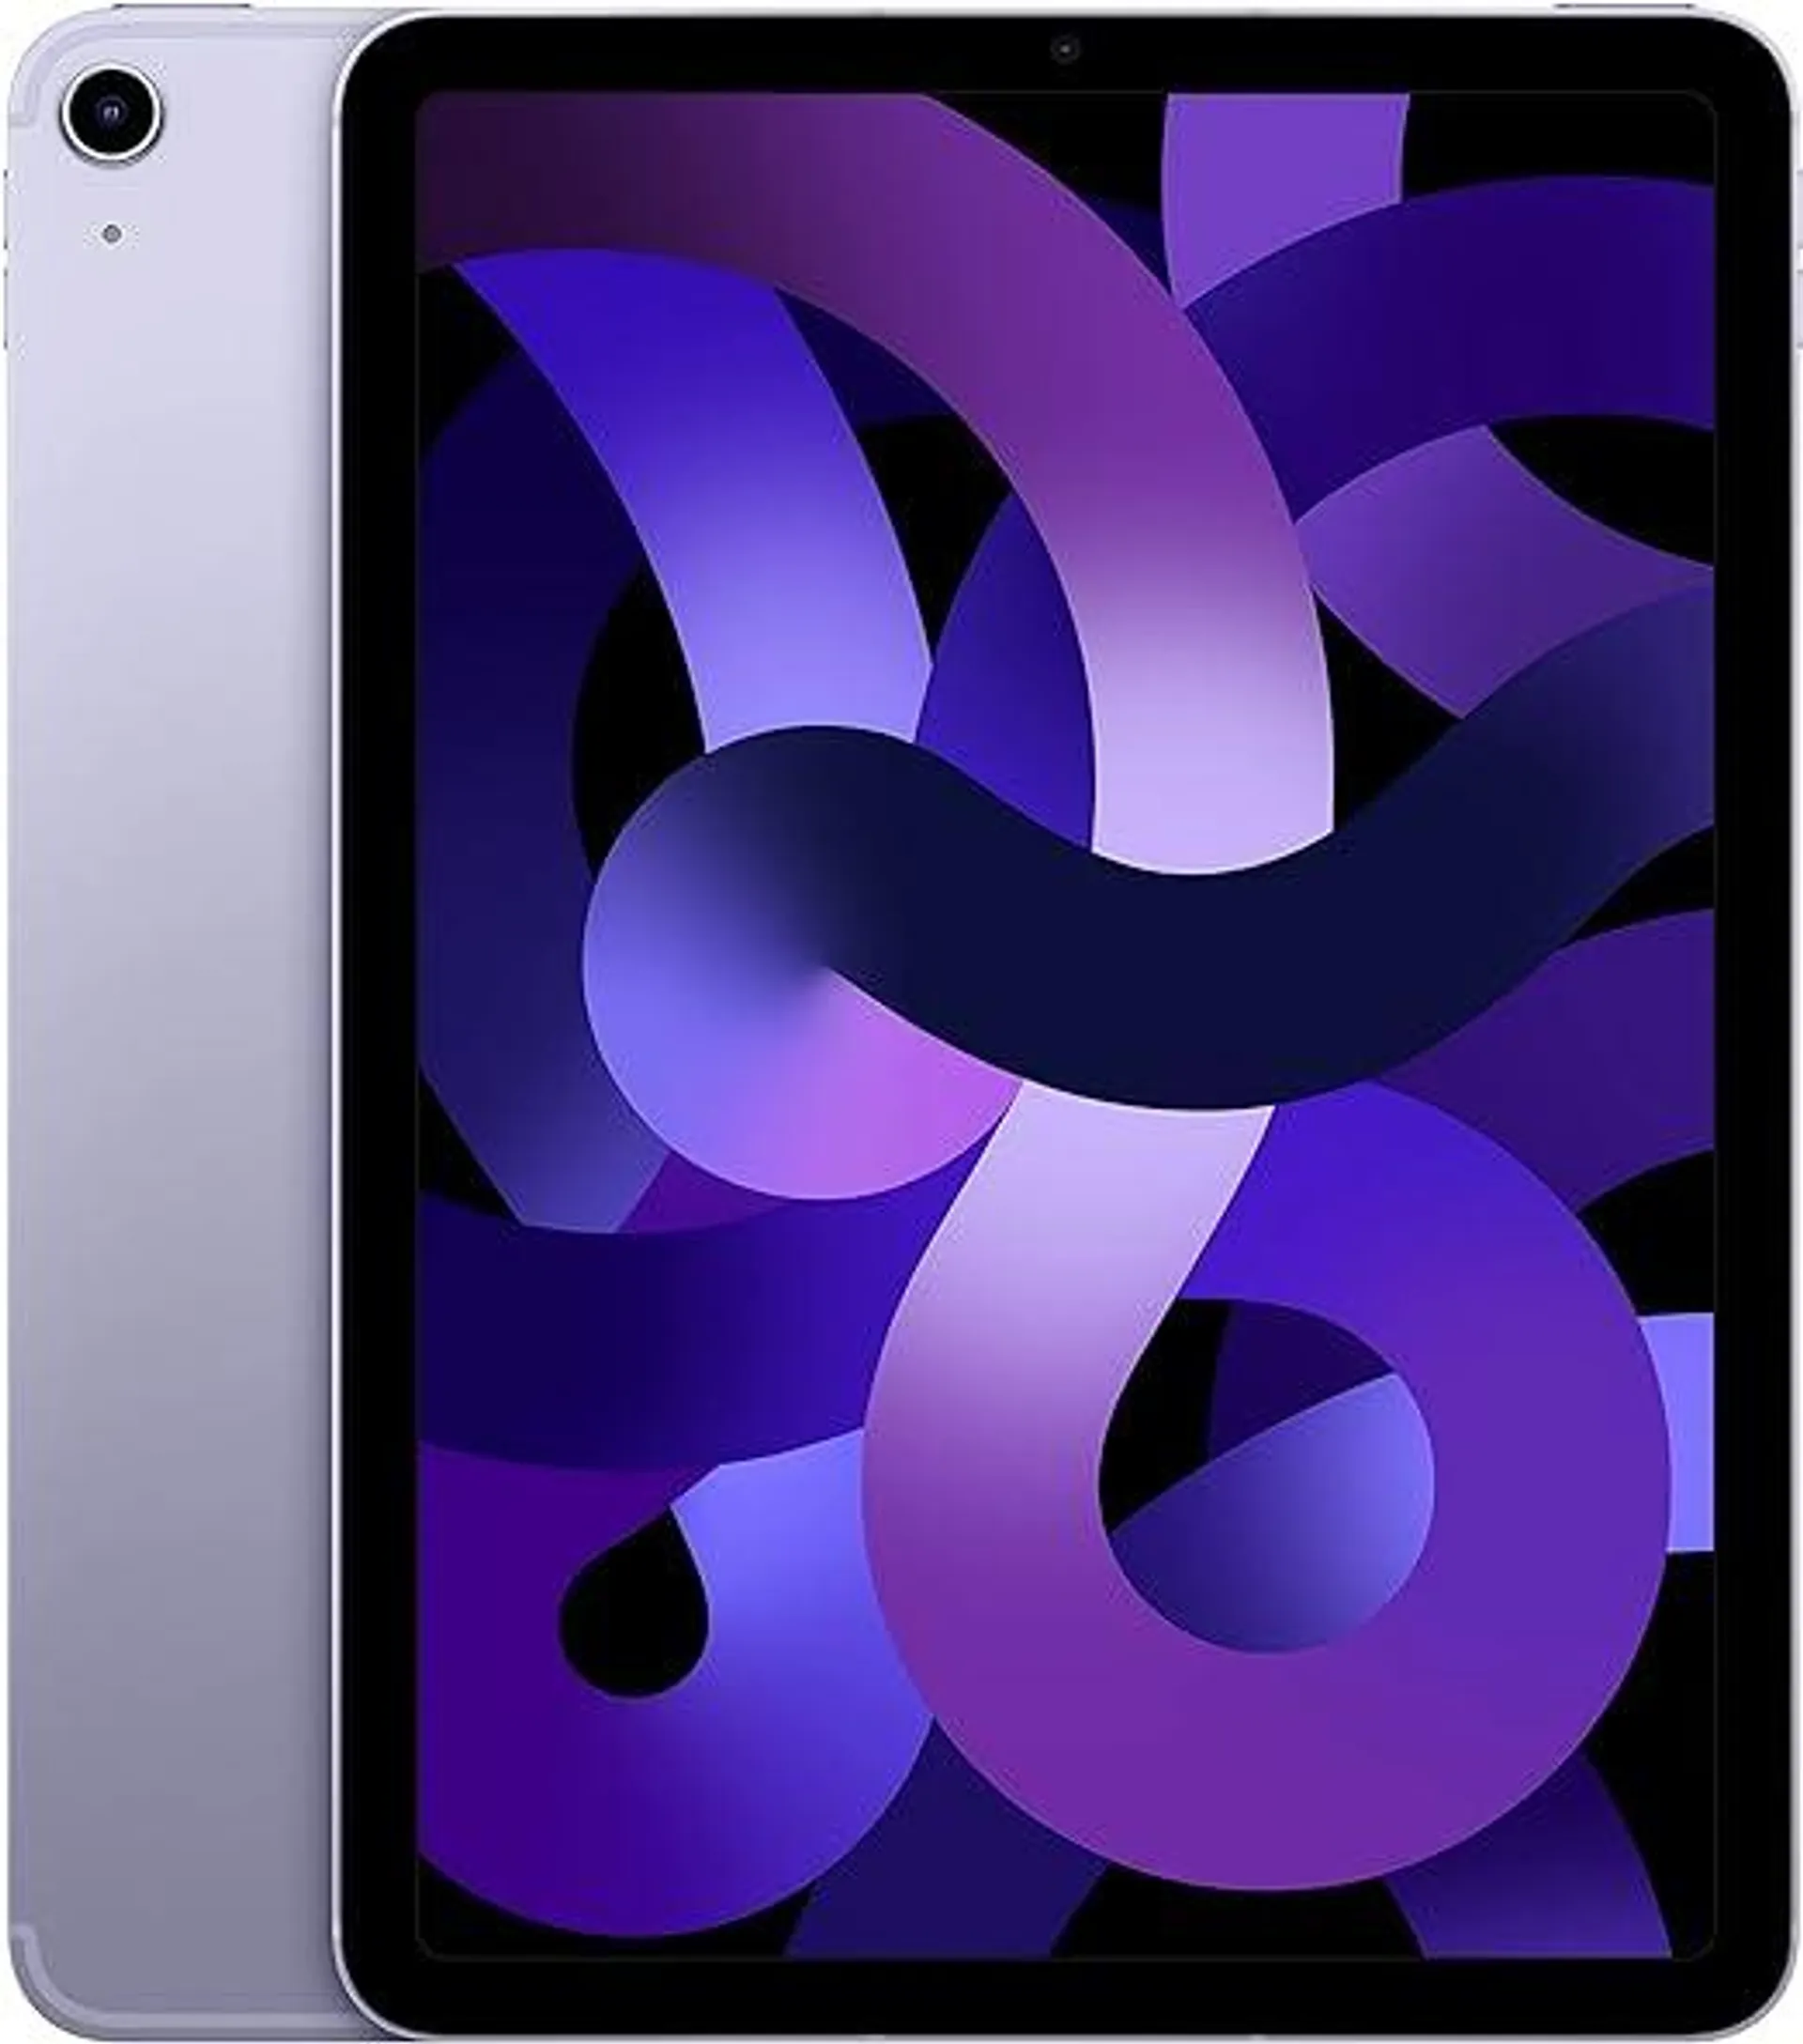 Apple iPad Air (5th Generation): with M1 chip, 10.9-inch Liquid Retina Display, 64GB, Wi-Fi 6 + 5G Cellular, 12MP front/12MP Back Camera, Touch ID, All-Day Battery Life – Purple